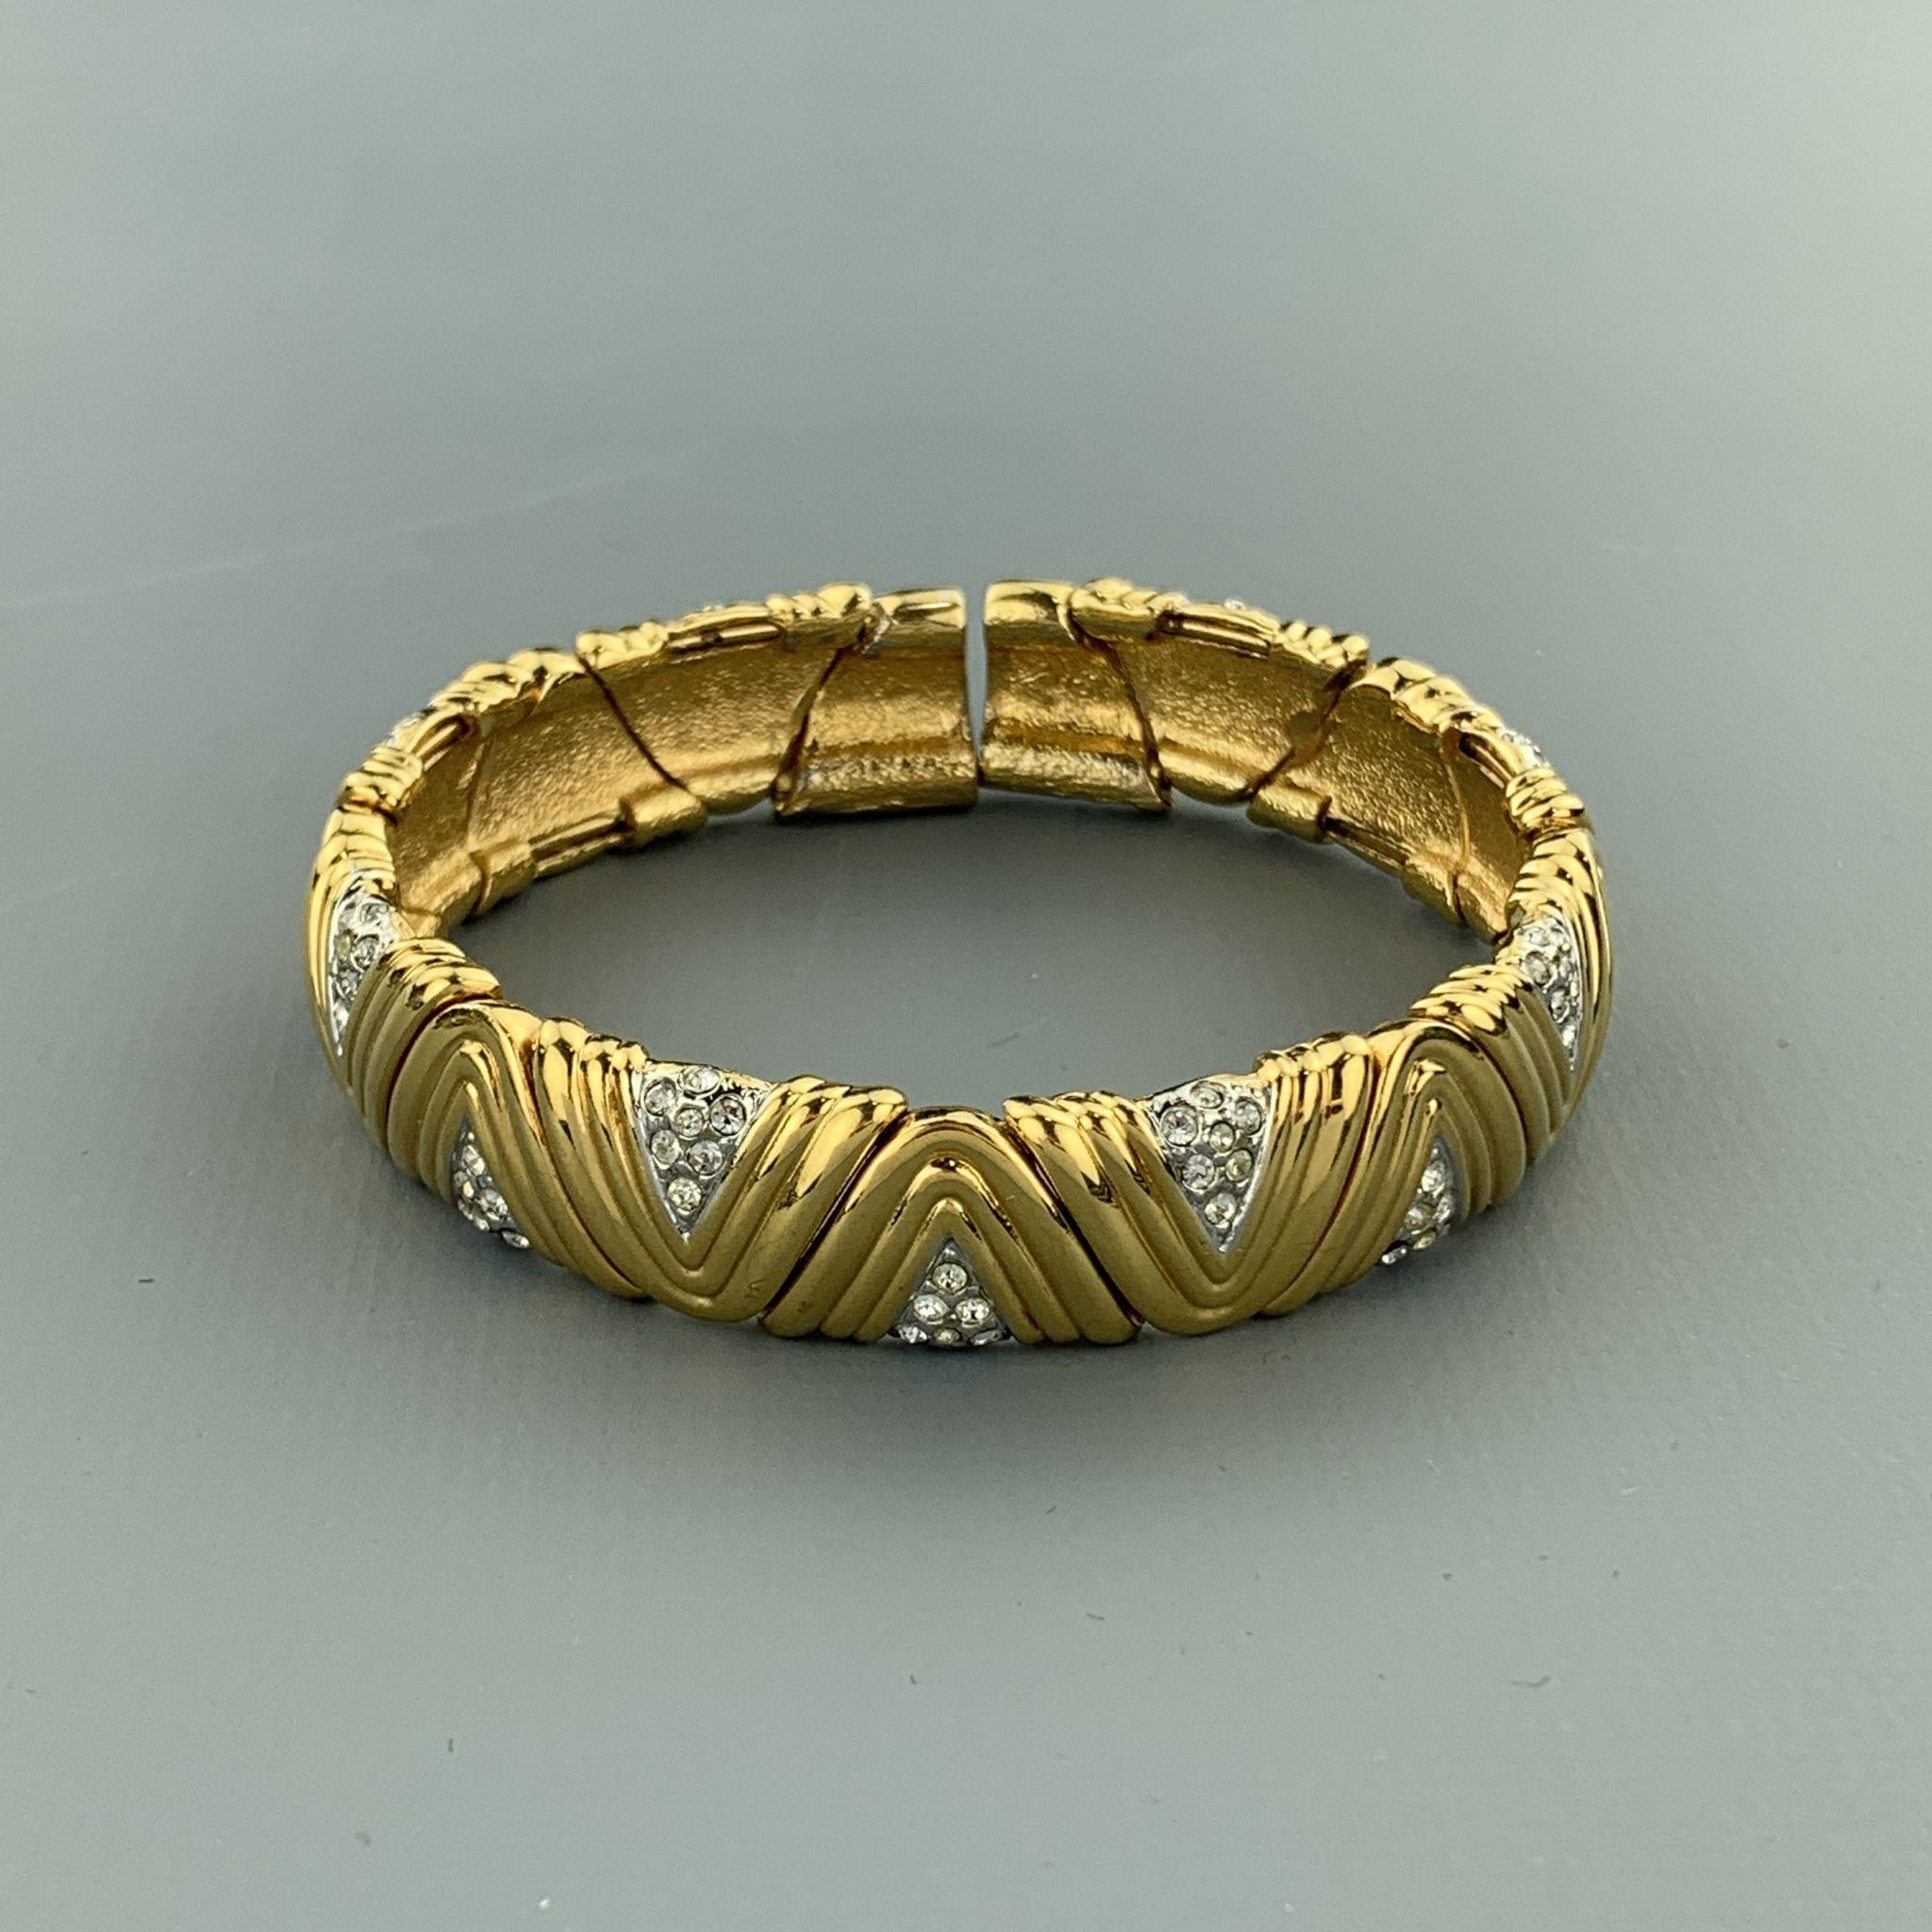 Vintage cuff bracelet comes in yellow gold tone textured metal with silver tone rhinestone panels and slit back.
 
Excellent Pre-Owned Condition.
 
Fits: 7 in.
SKU: 96312
Category: Bracelet

More Details
Brand: VINTAGE
Color: Gold Tone
Material: